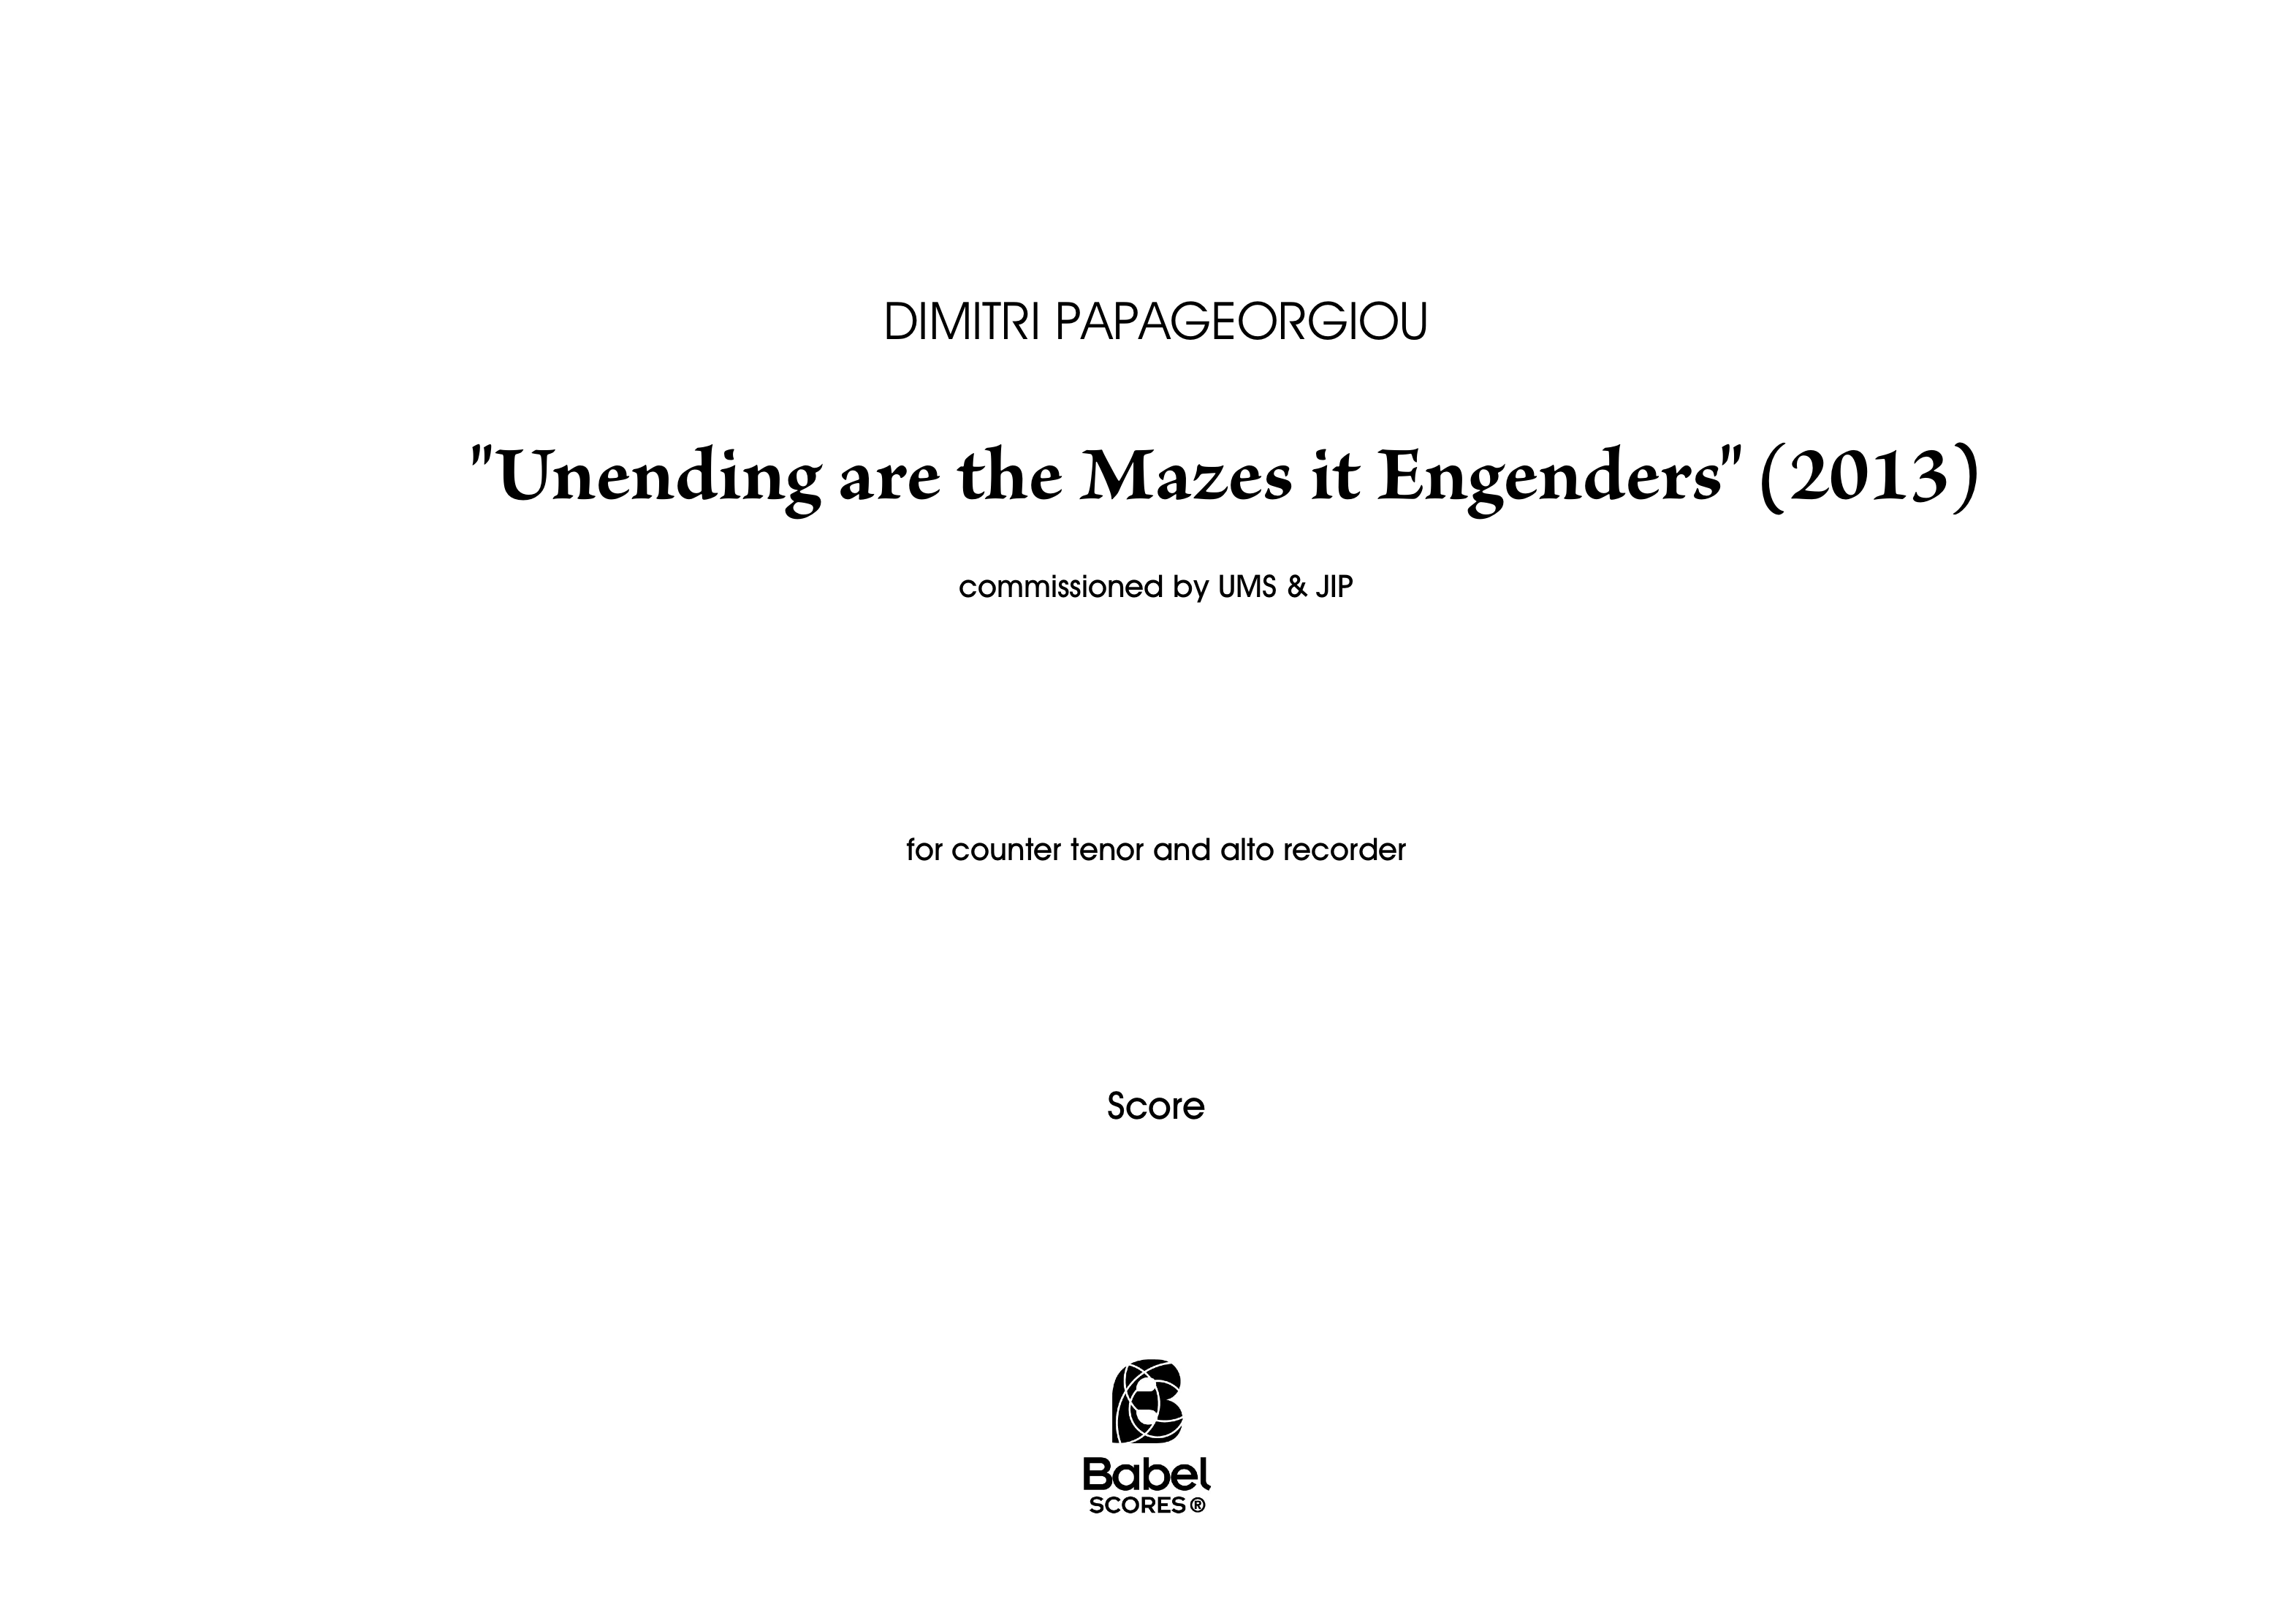 Undending are the Mazes it Engenders Dimitri Papageorgiou A3 z